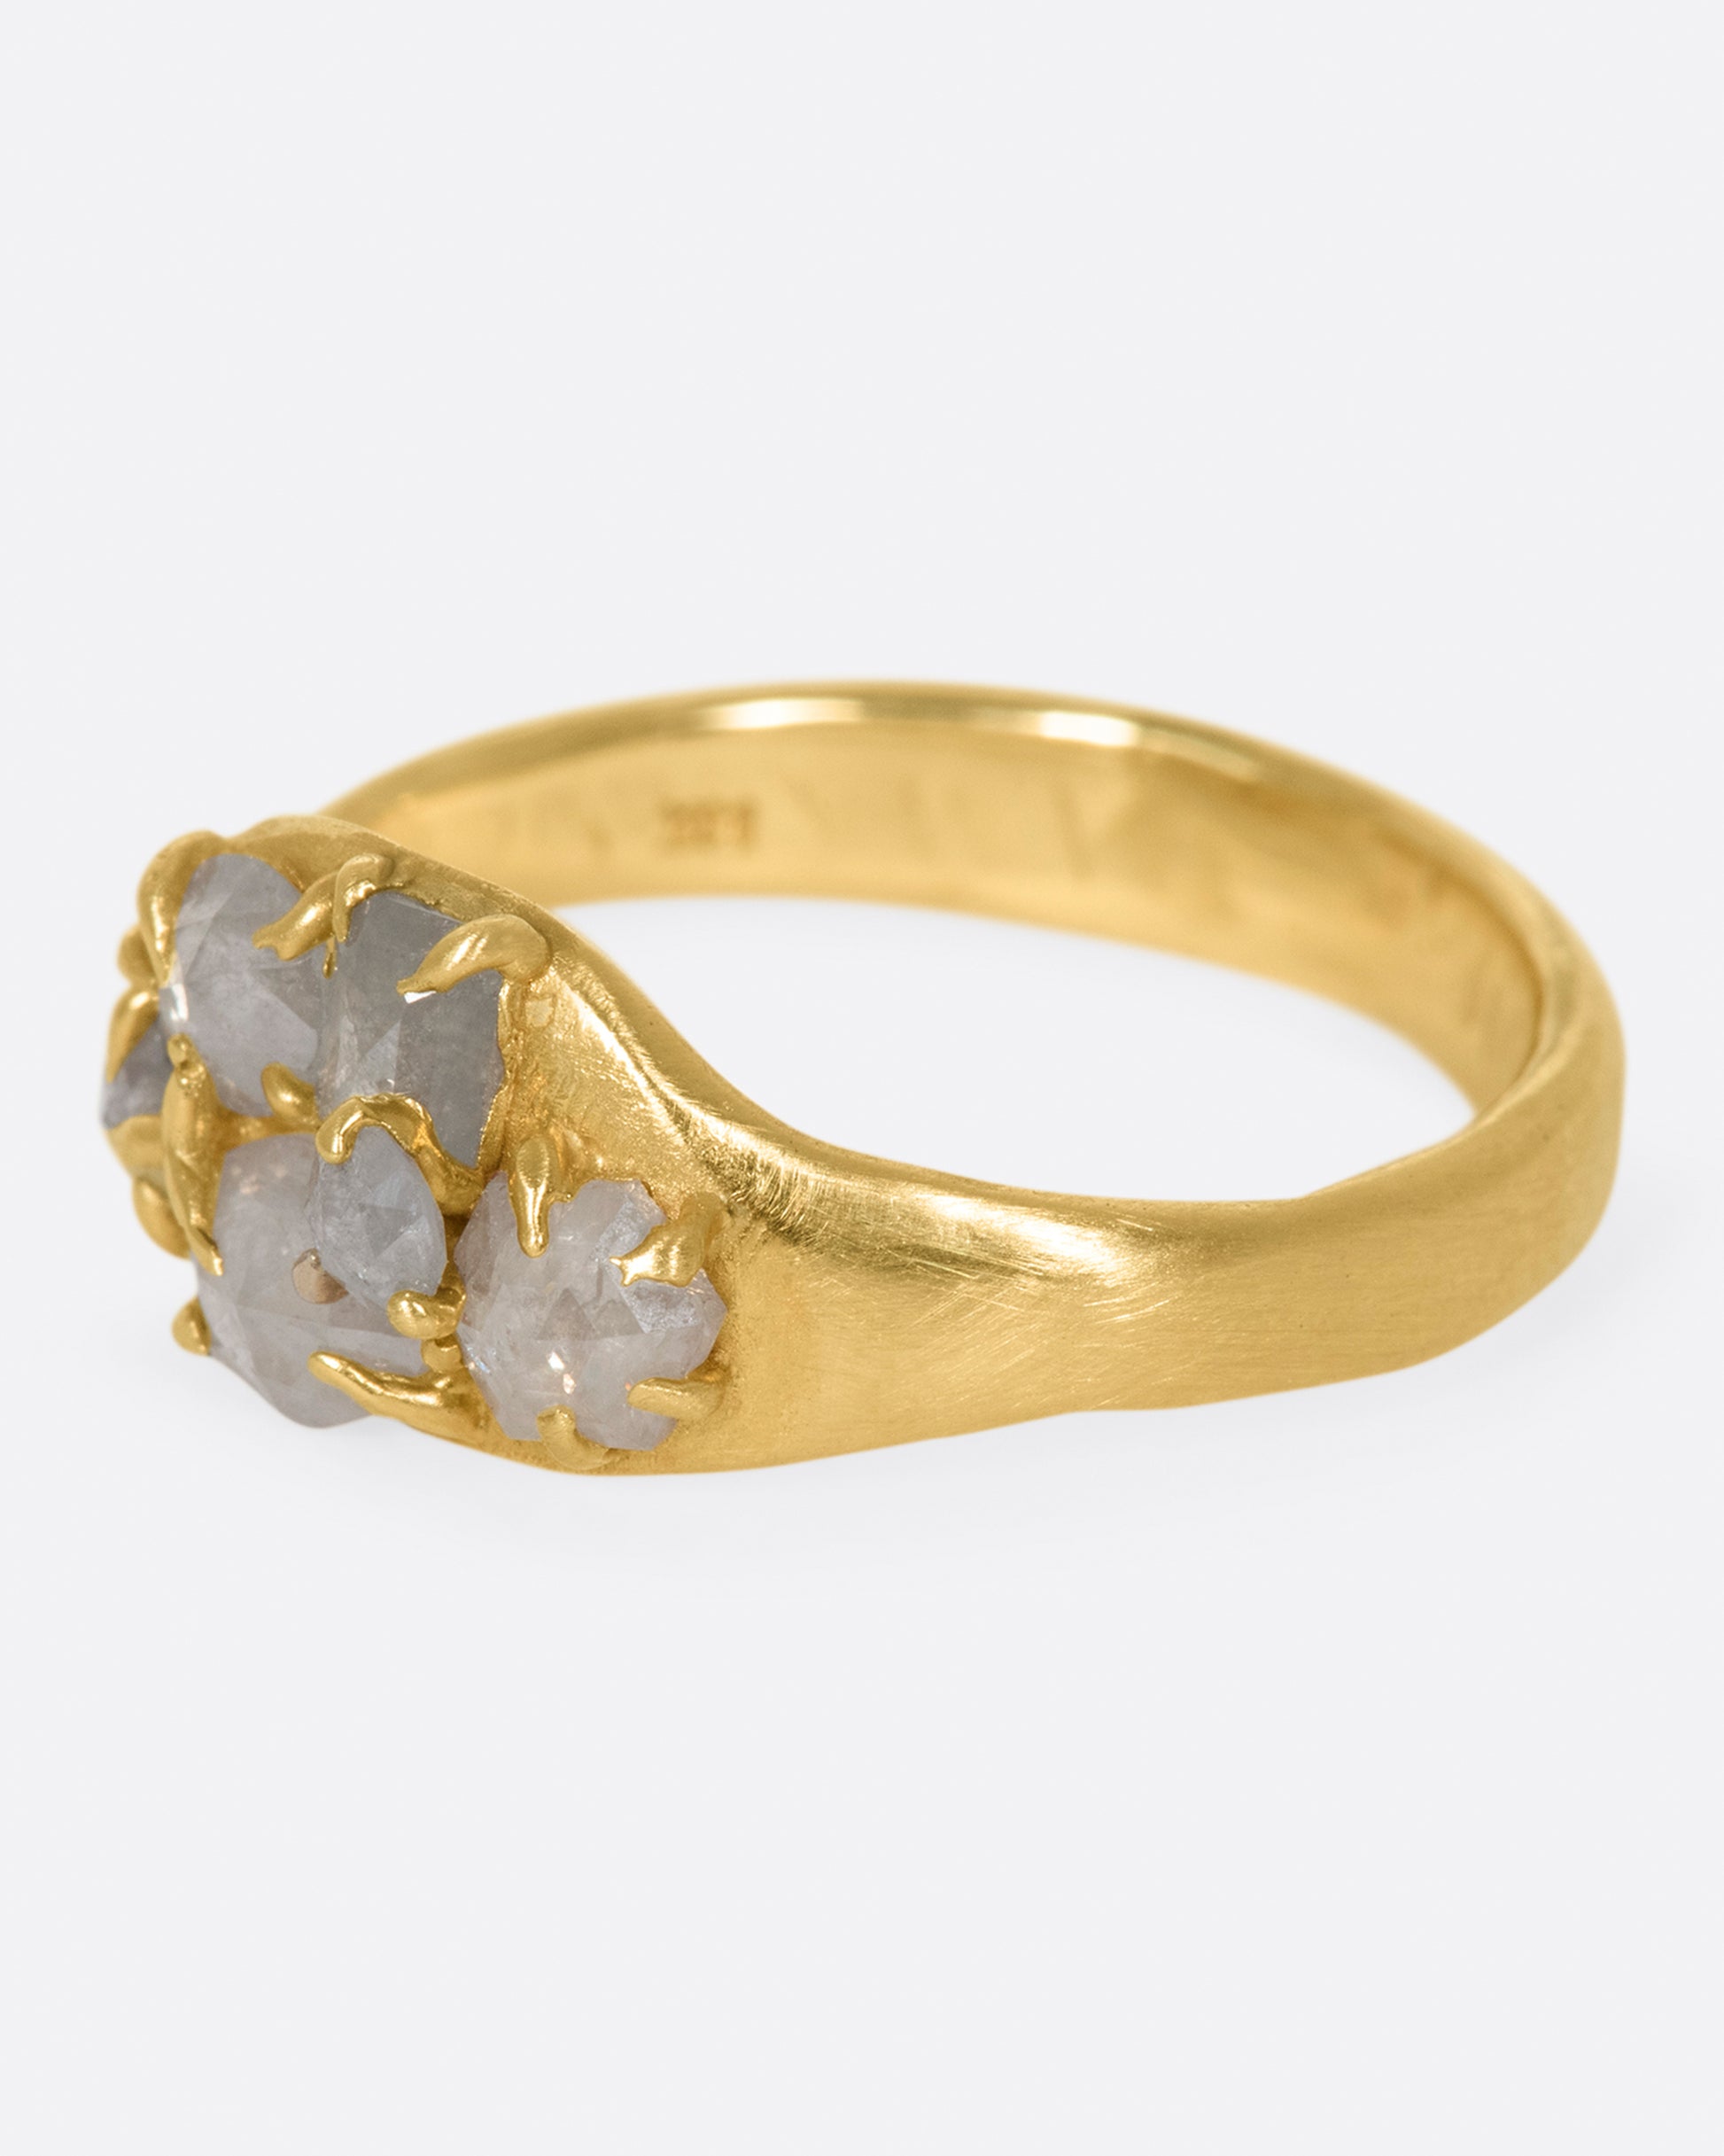 A yellow gold ring with a cluster of prong set gray diamonds on its face.